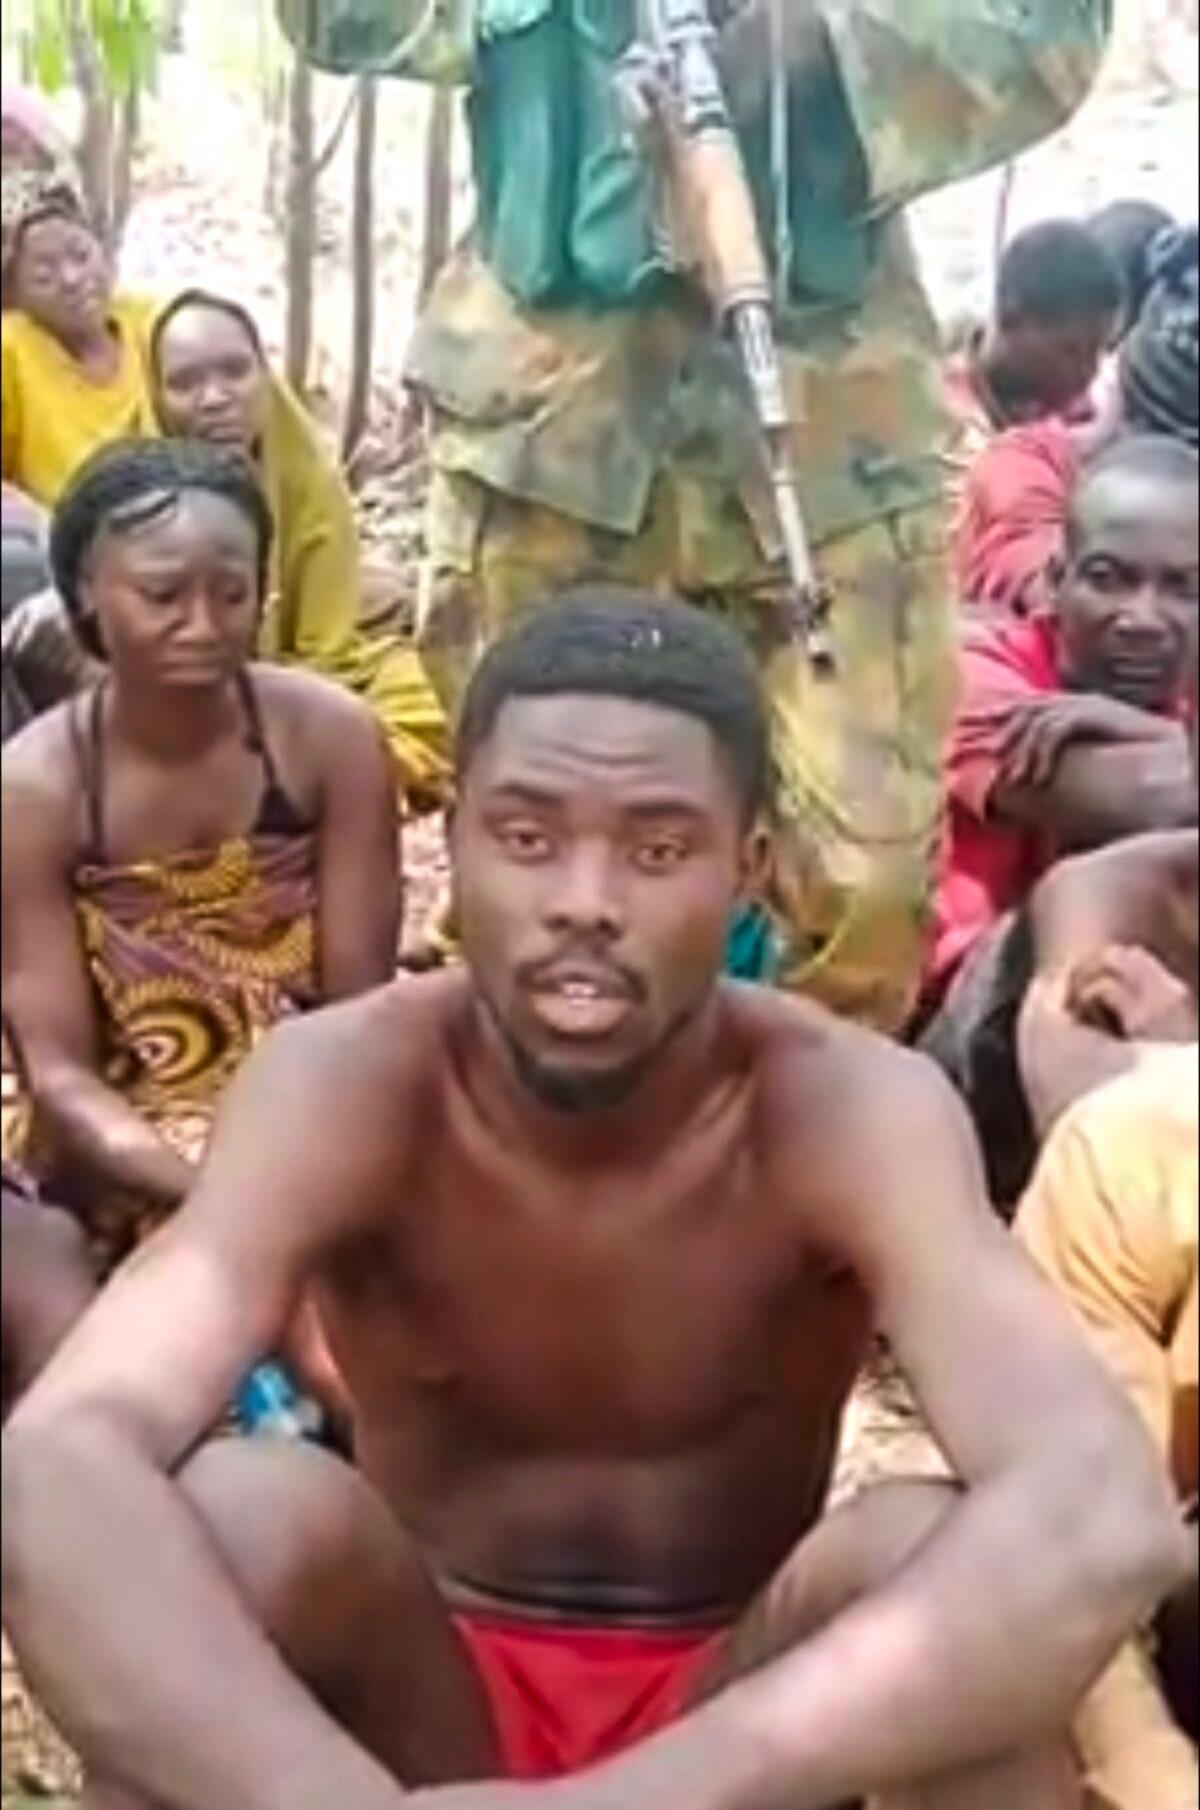 Students kidnapped from the Federal College of Forestry Mechanization, in an undisclosed location, held under armed guard, in a video released by the kidnappers on March 12, 2021. (screenshot)